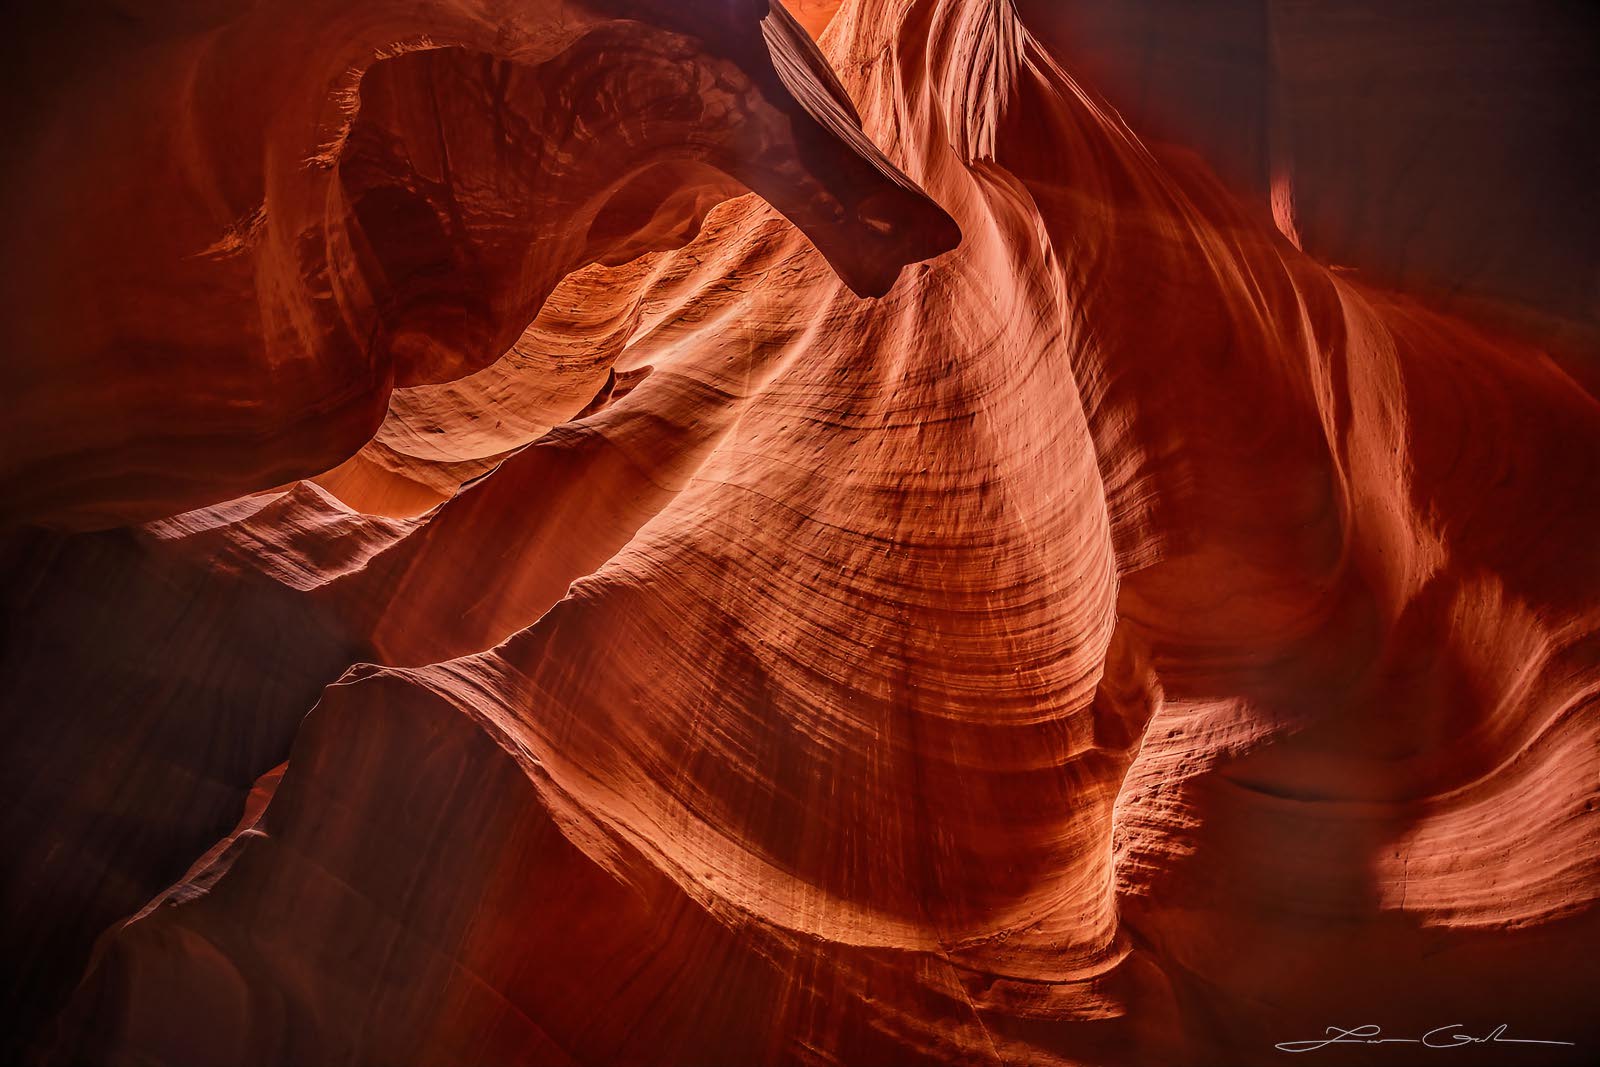 Abstract of a beautifully shaped sandstone inside a slot canyon